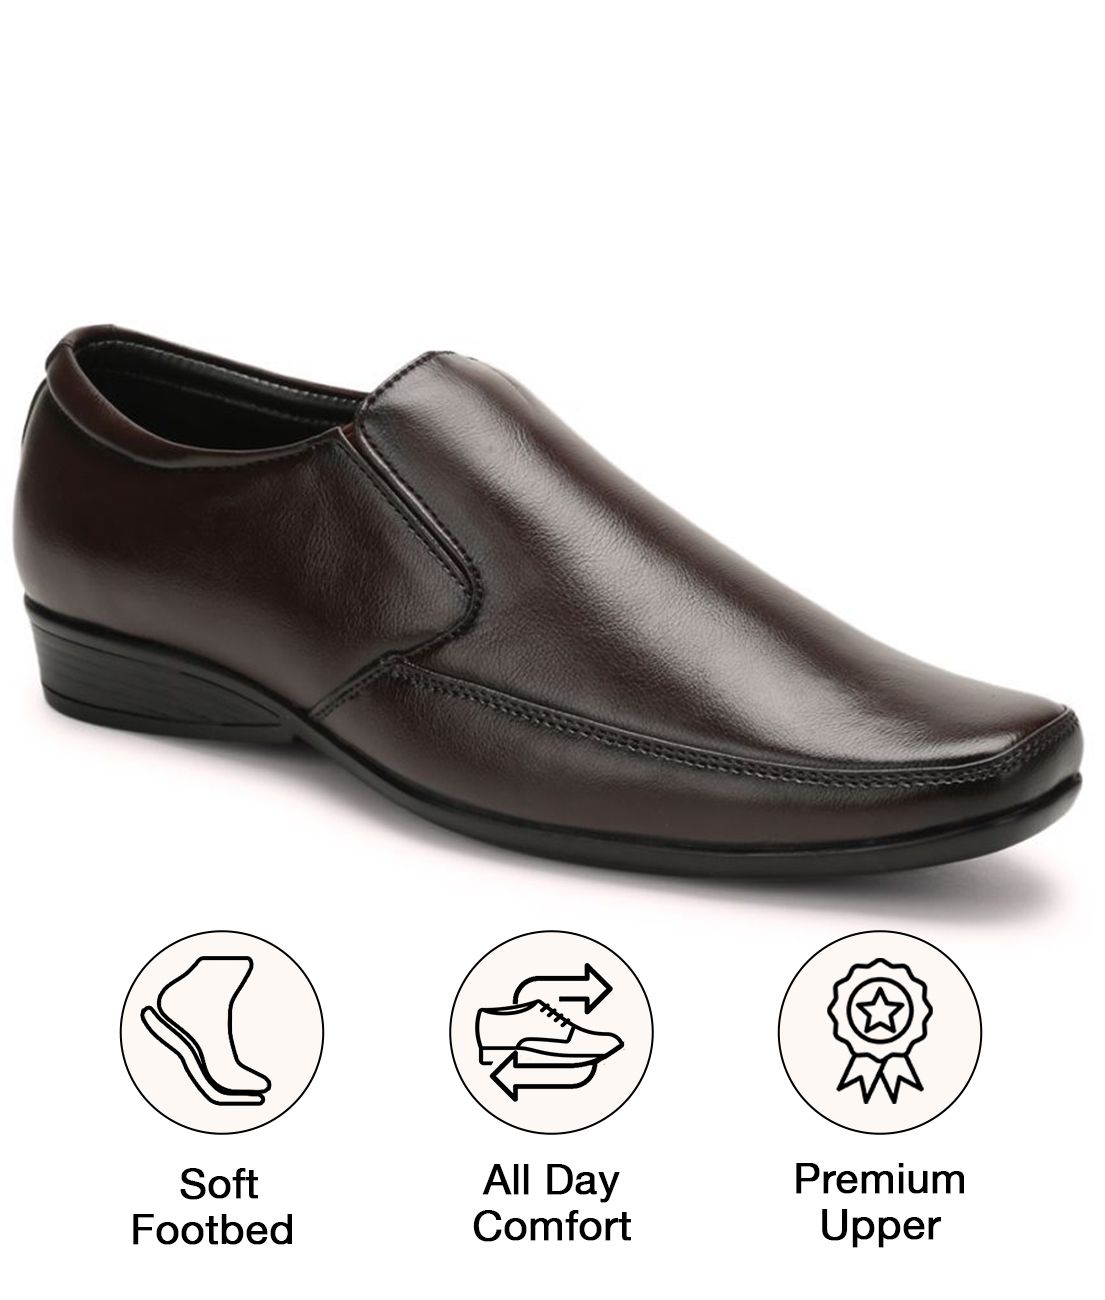     			UrbanMark Men Light Weight Square-Toe Faux Leather Slip-On Formal Shoes- Brown